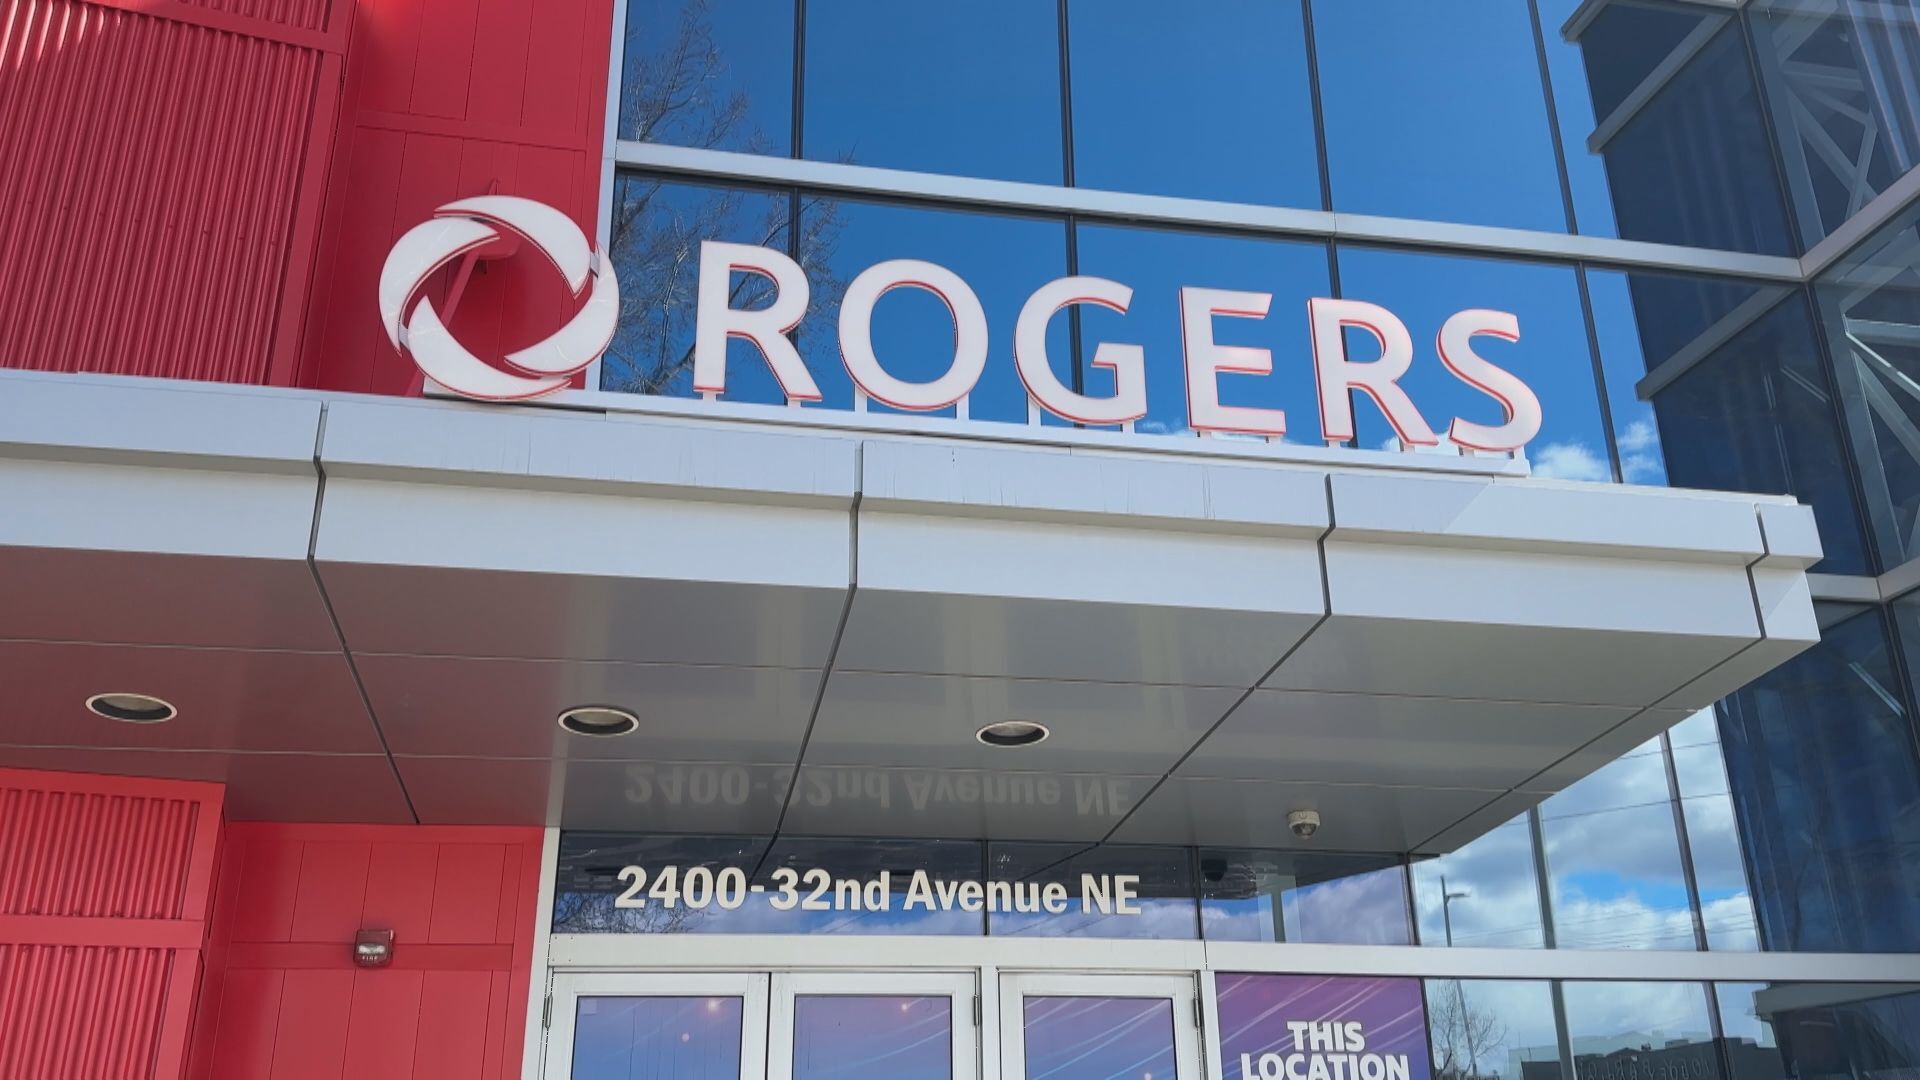 One year post Shaw merger: Rogers announces collaboration with CableLabs